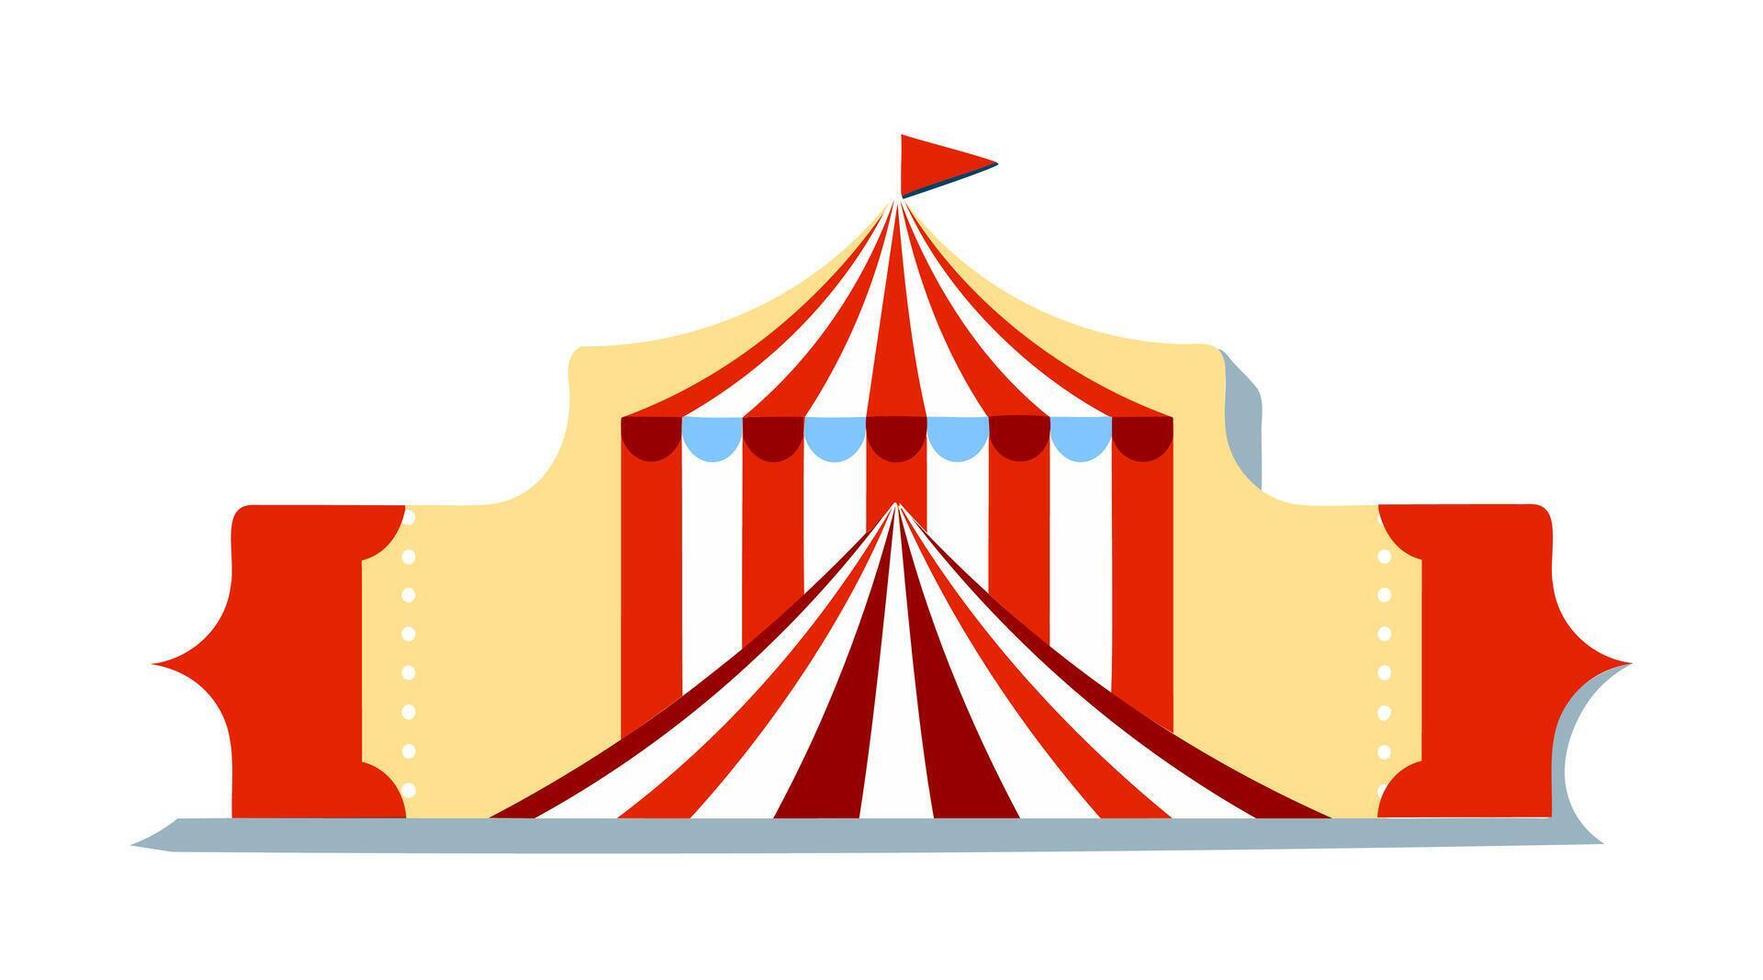 a circus tent with a red and white striped top vector